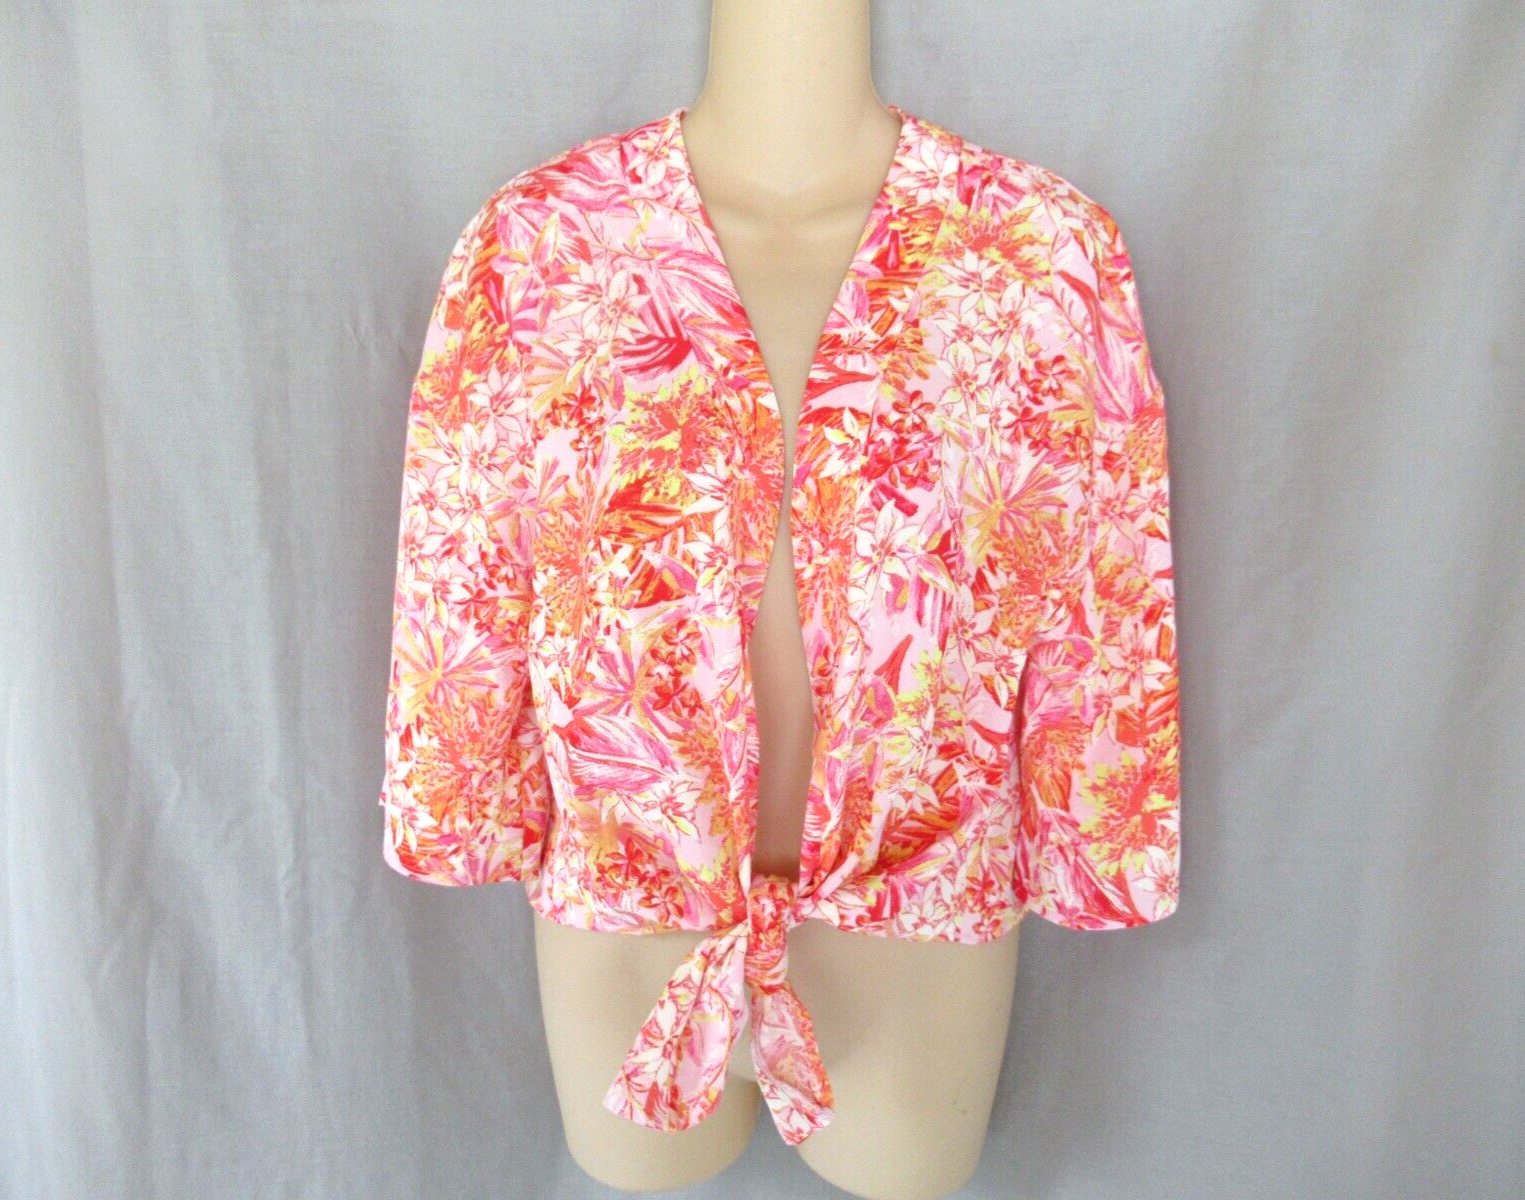 Primary image for Hippie Rose top open tie  kimono cardigan Small pink tropical short sleeves New